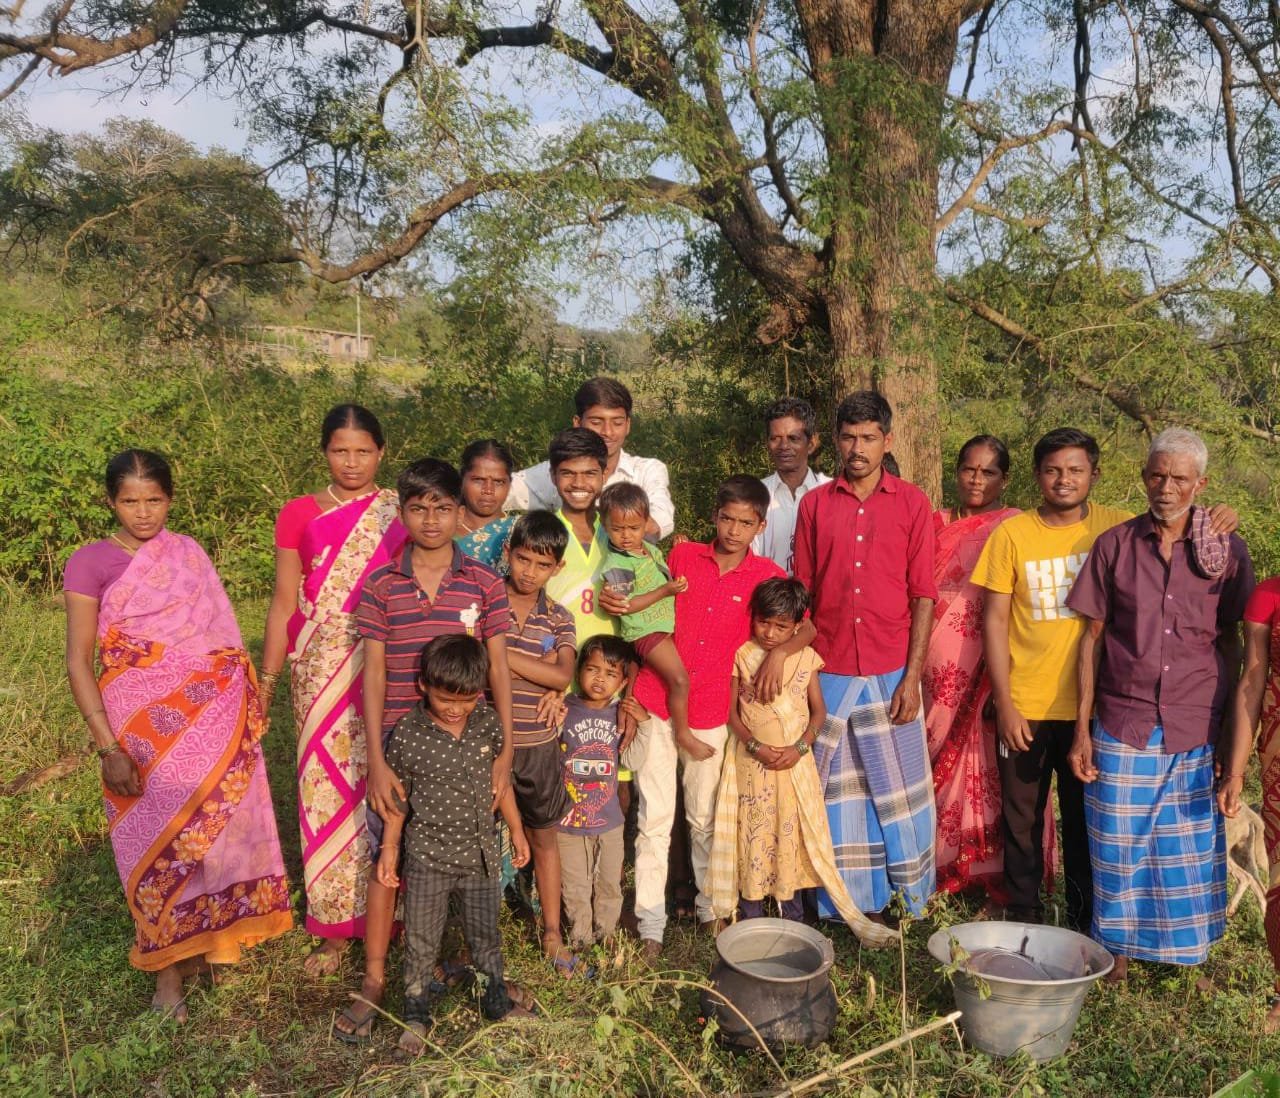 People from a tribal community of the Kalvarayan Hills in Tamil Nadu